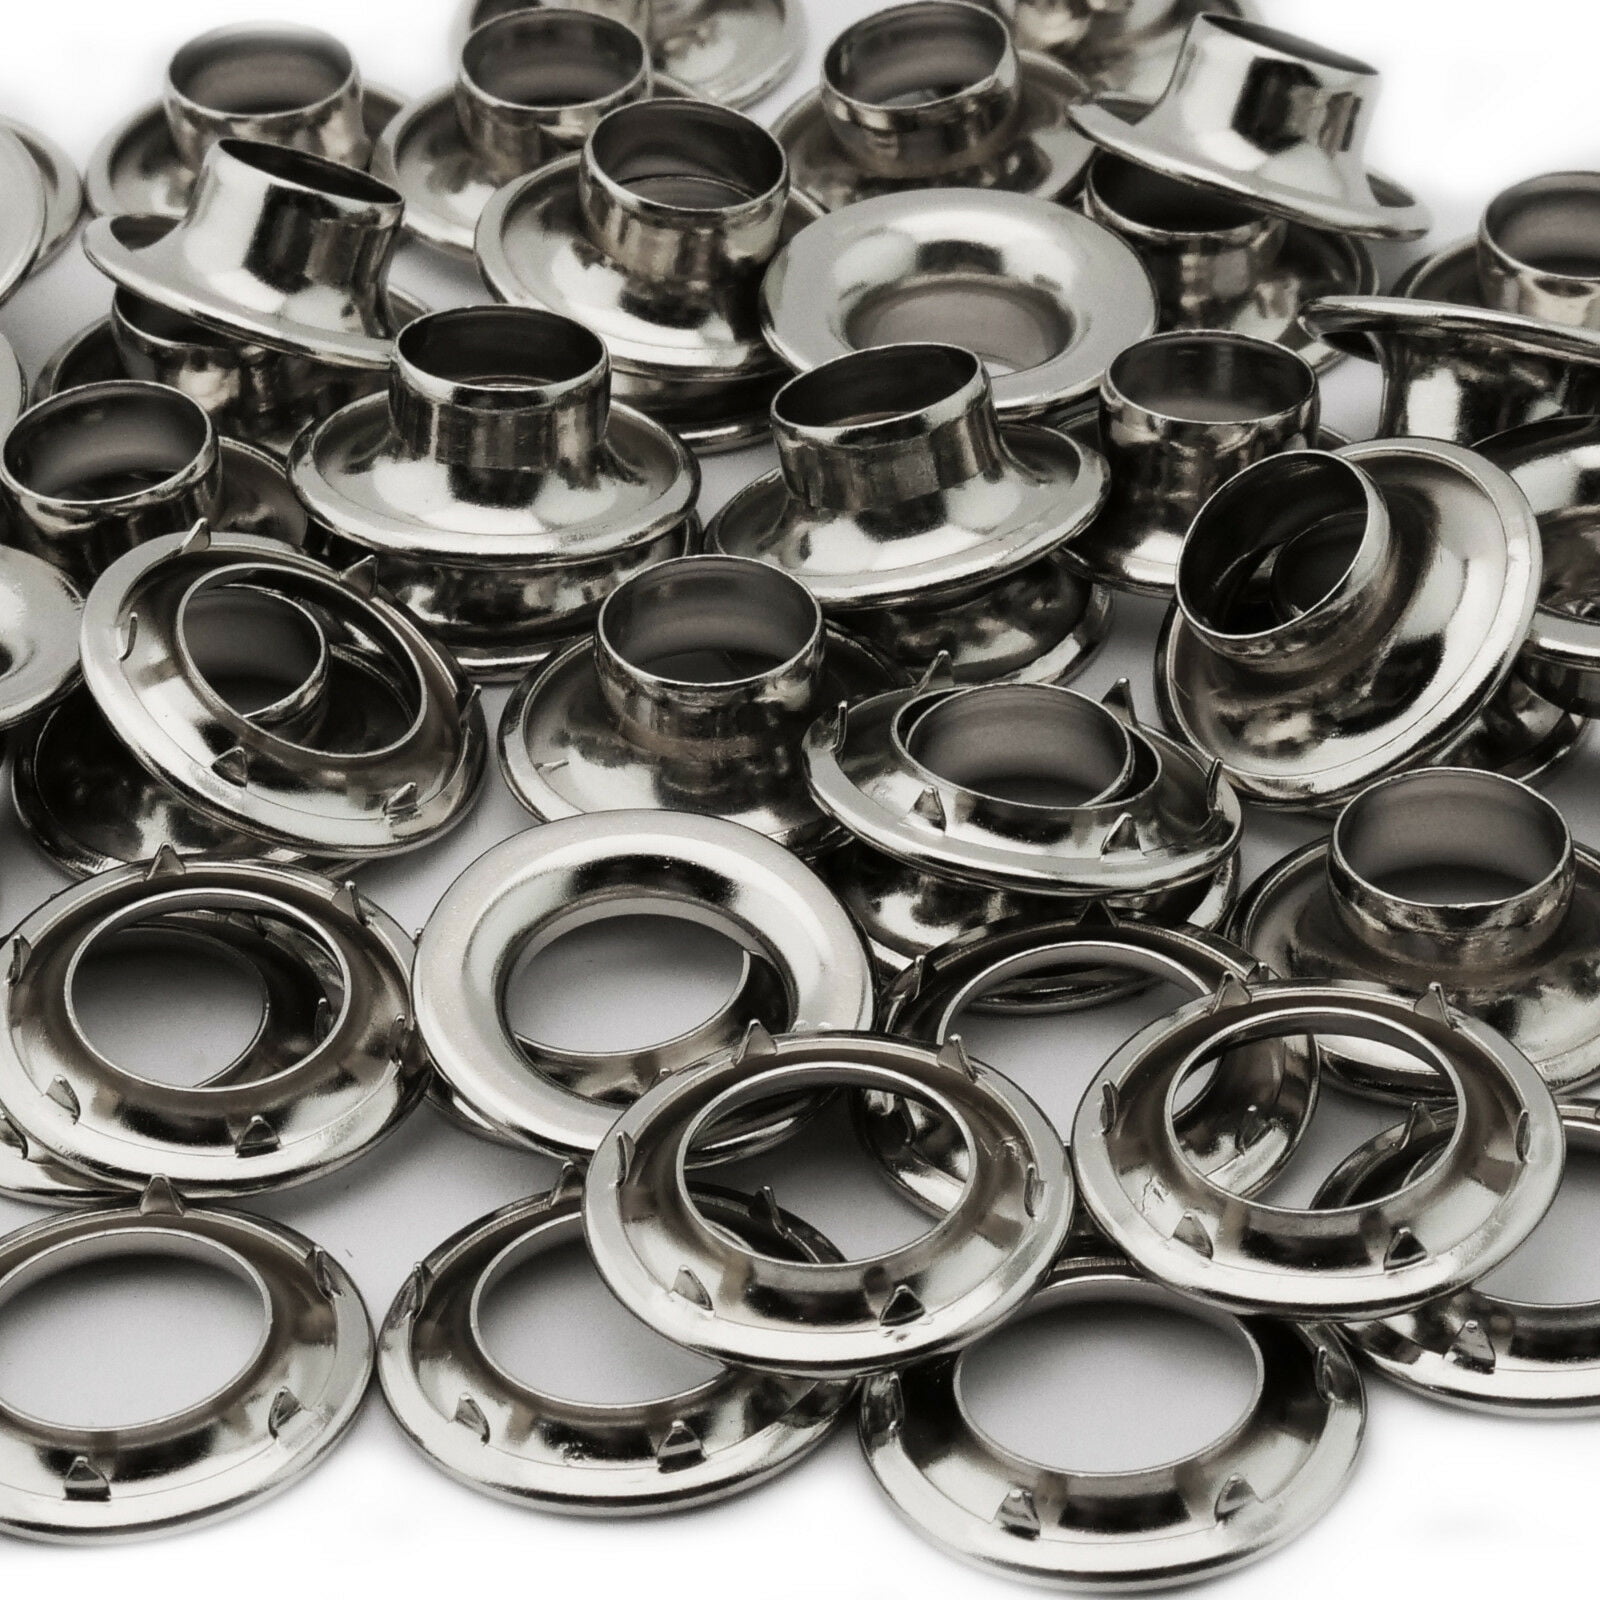 144 Sets C.S Size 6 Osborne Nickel Plated Grommets & Spur Washers #N2-6 